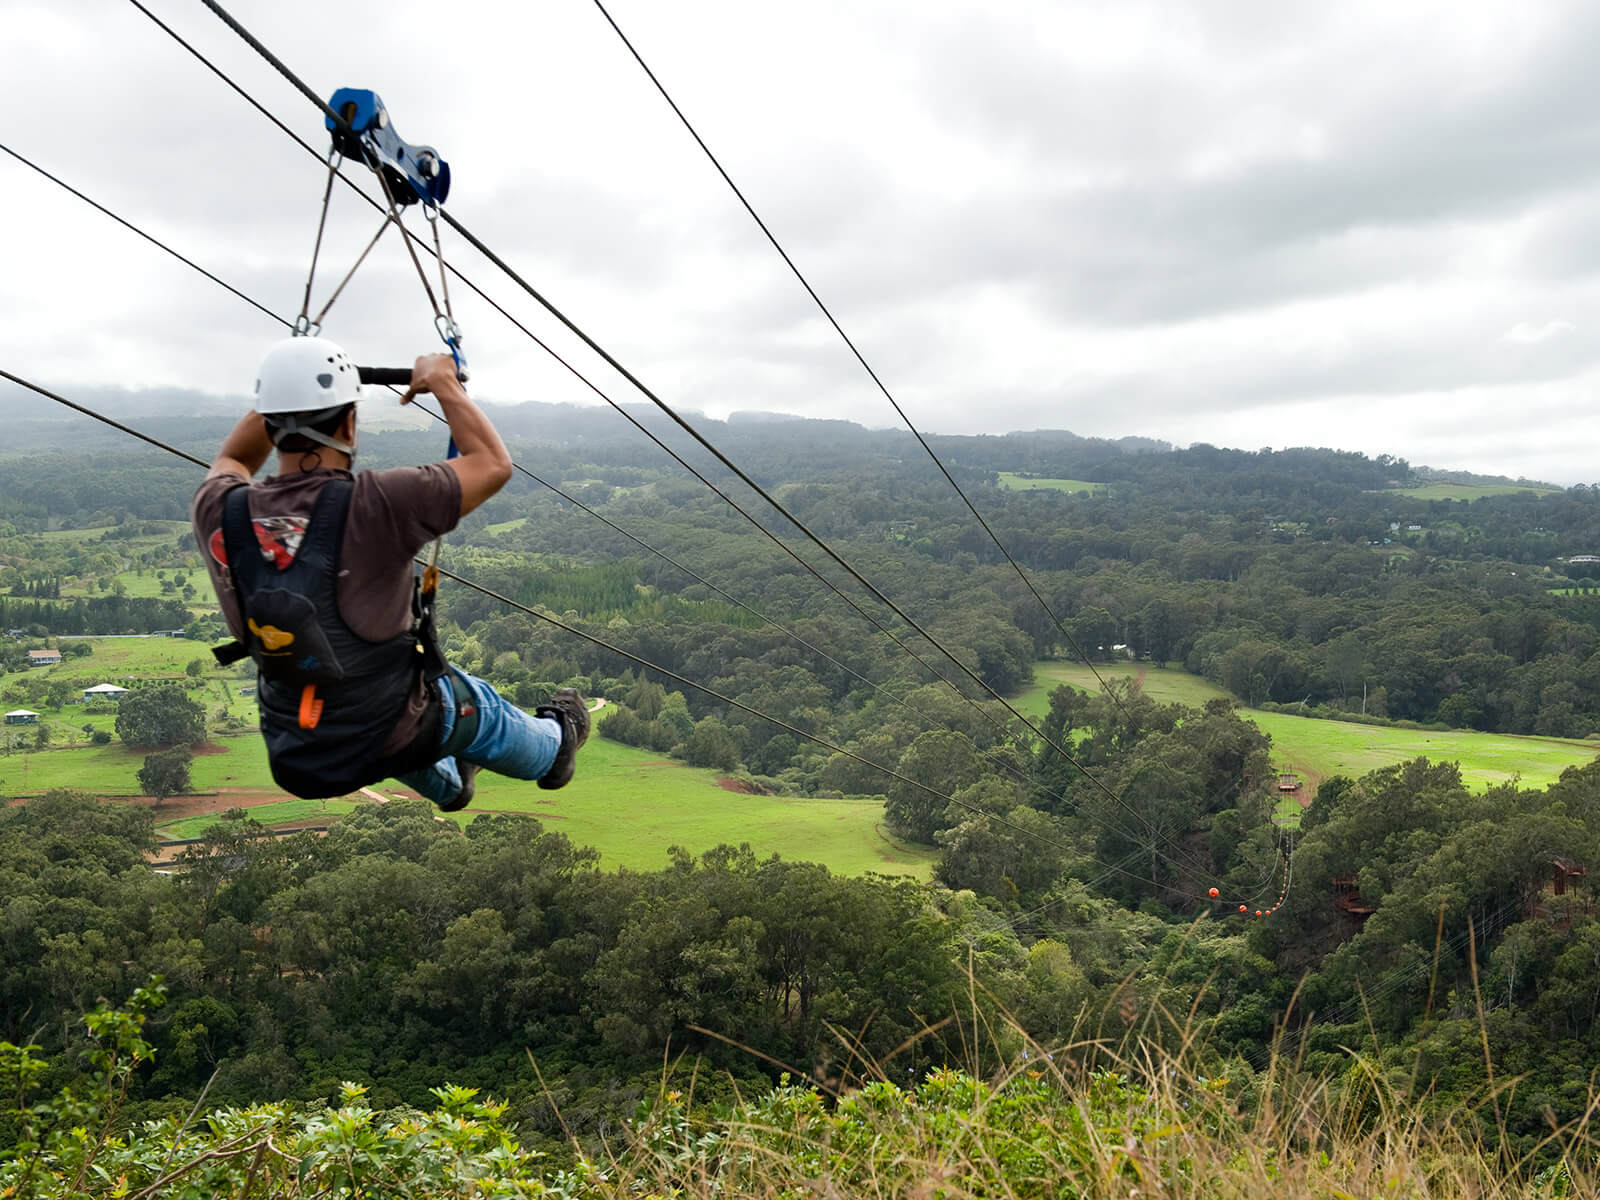 Plan These 4 Exciting Activities To Do In Tamarindo Costa Rica